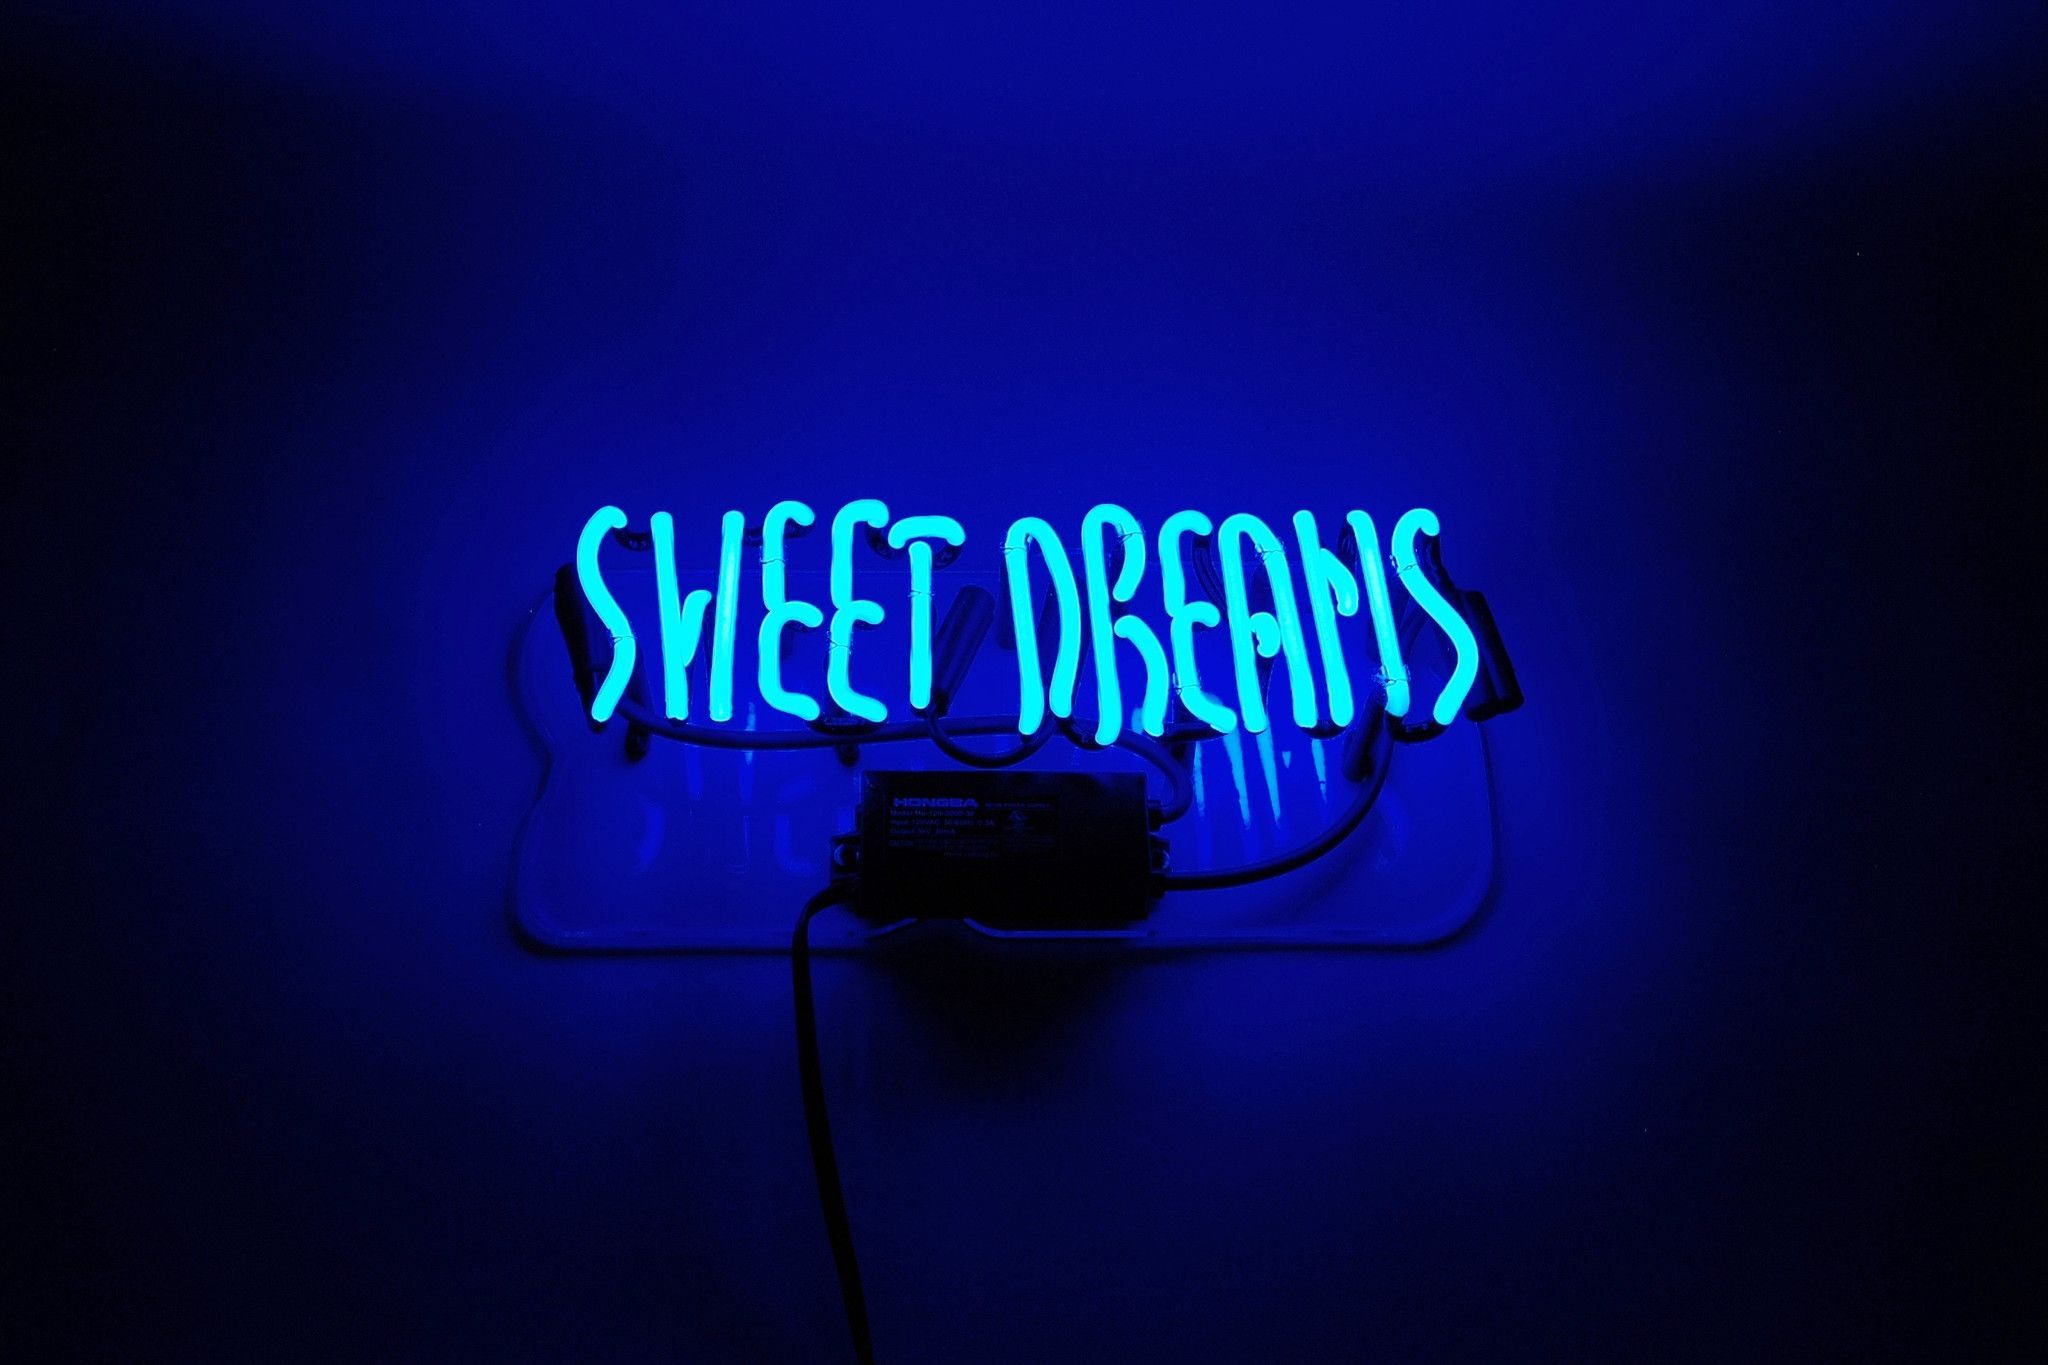 A blue neon sign that says sweet dreams - Neon blue